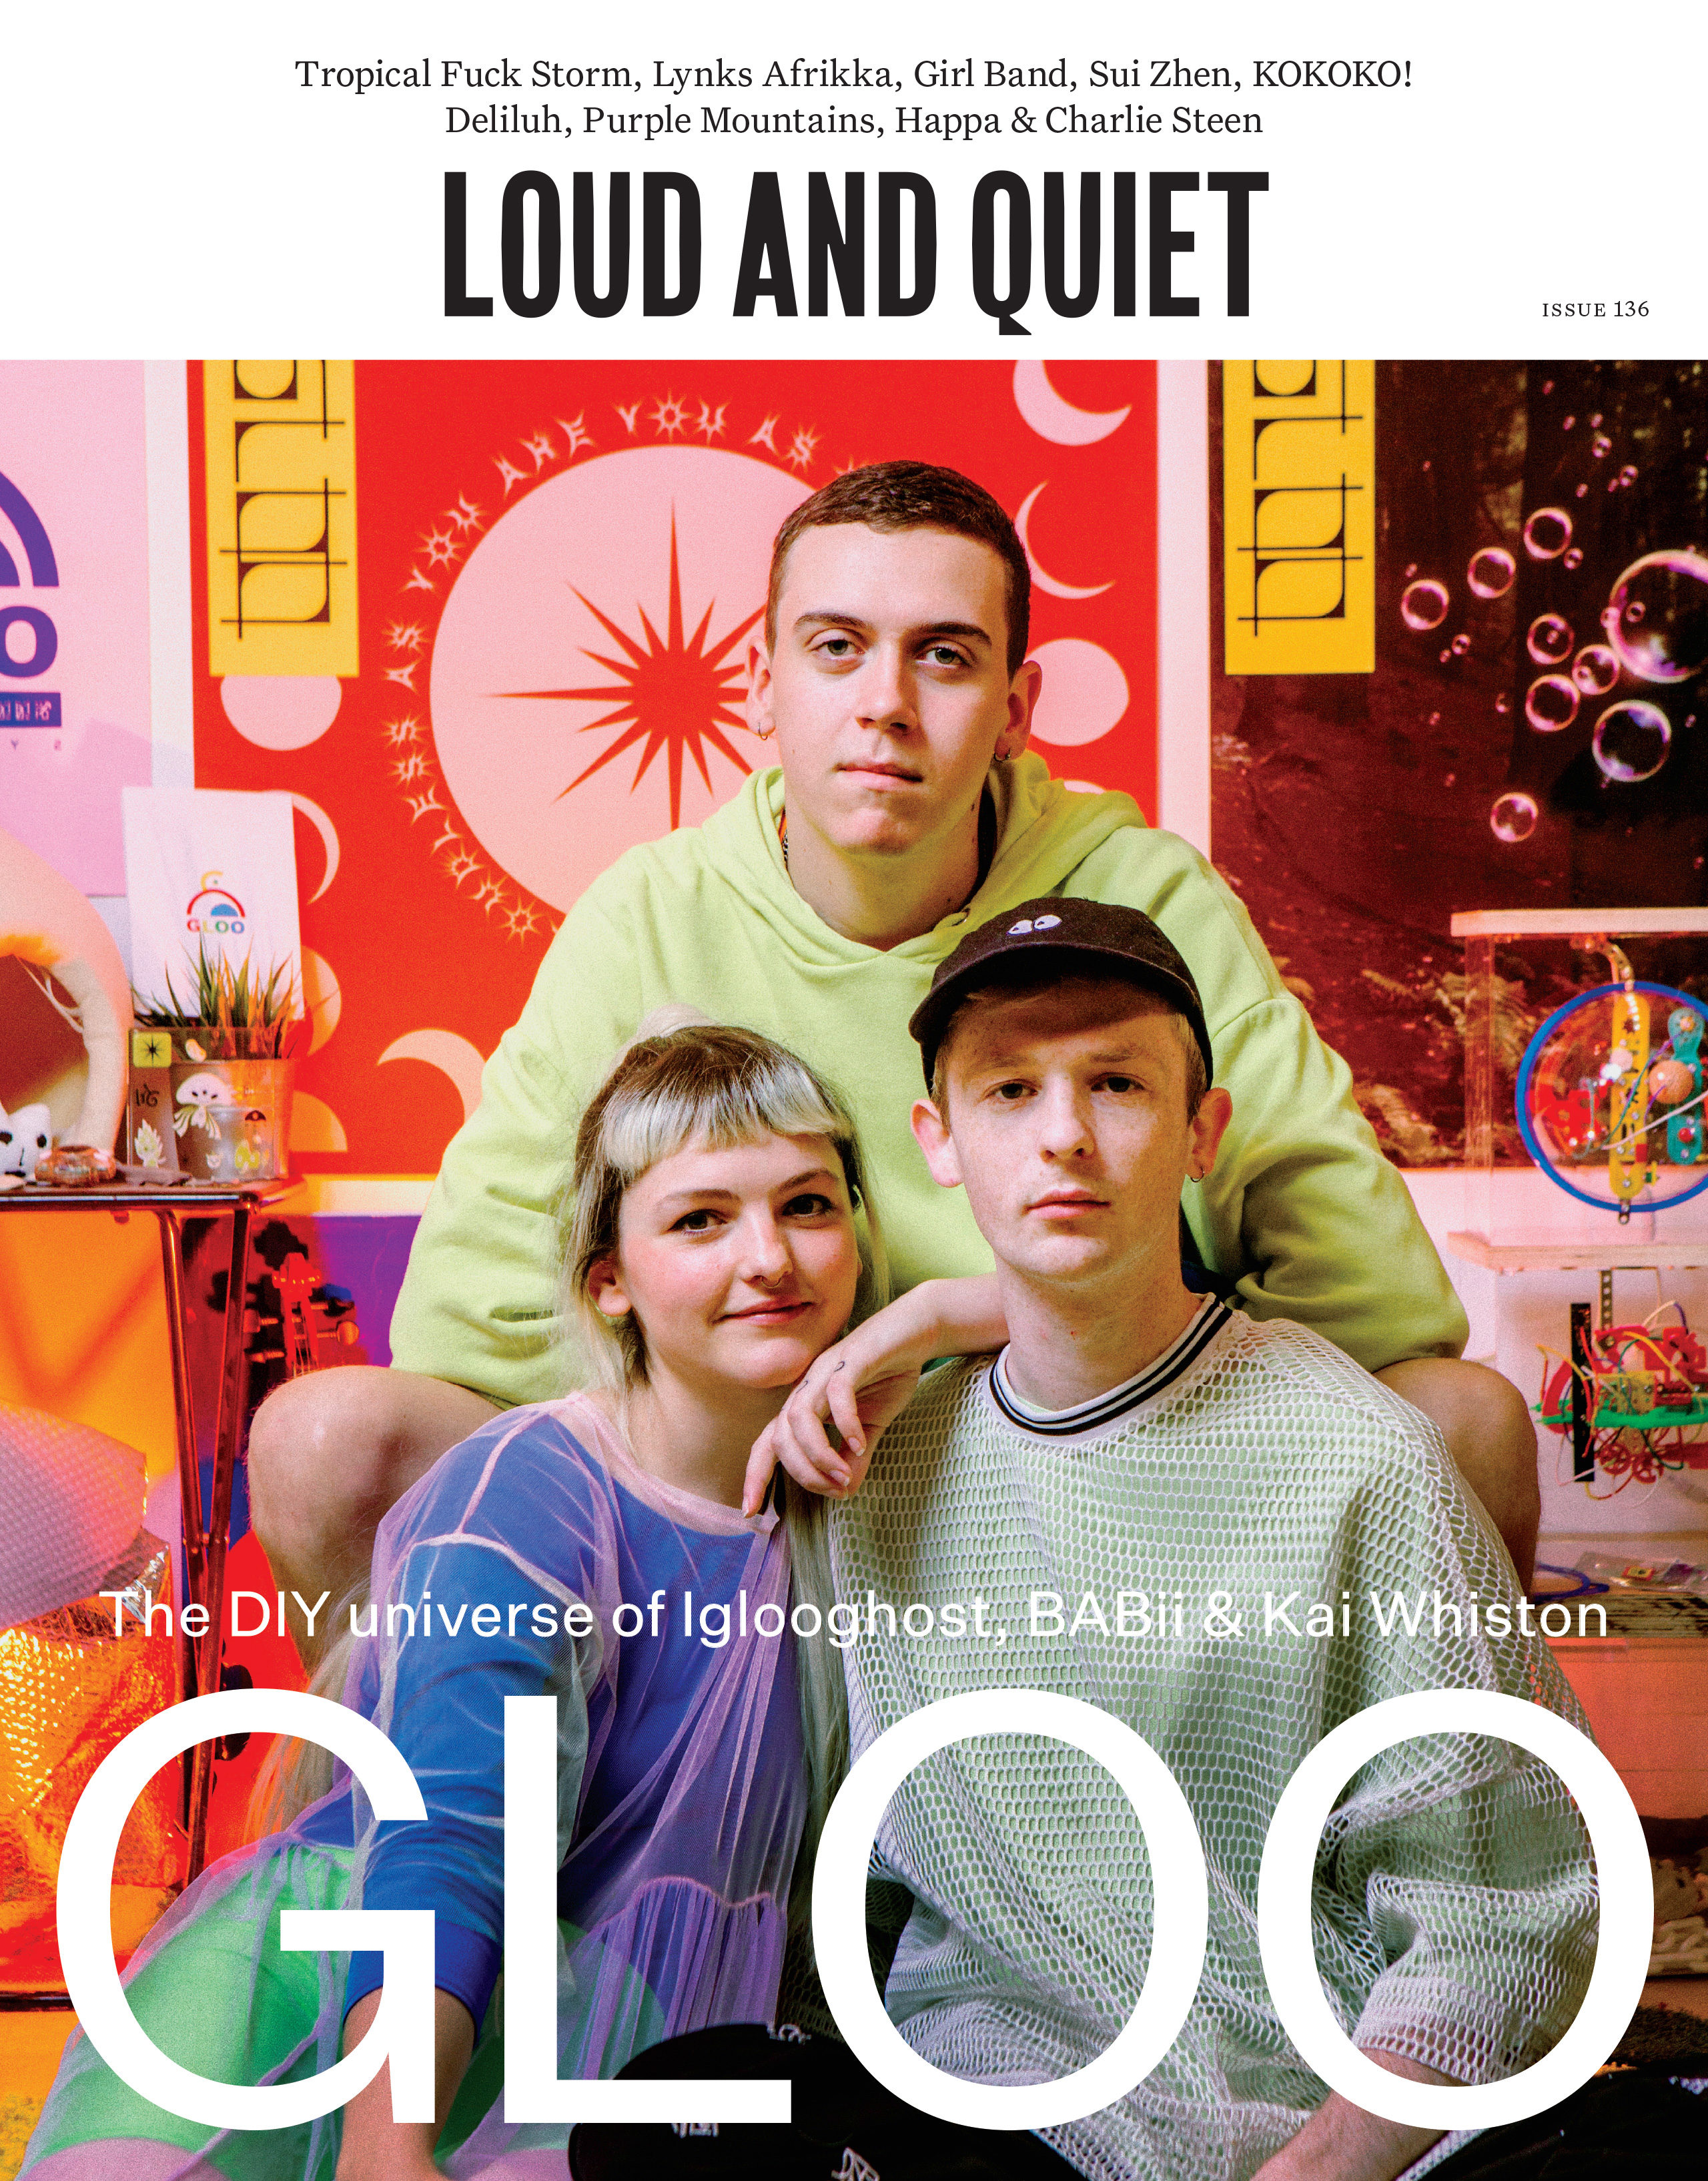 Issue 136 Loud And Quiet